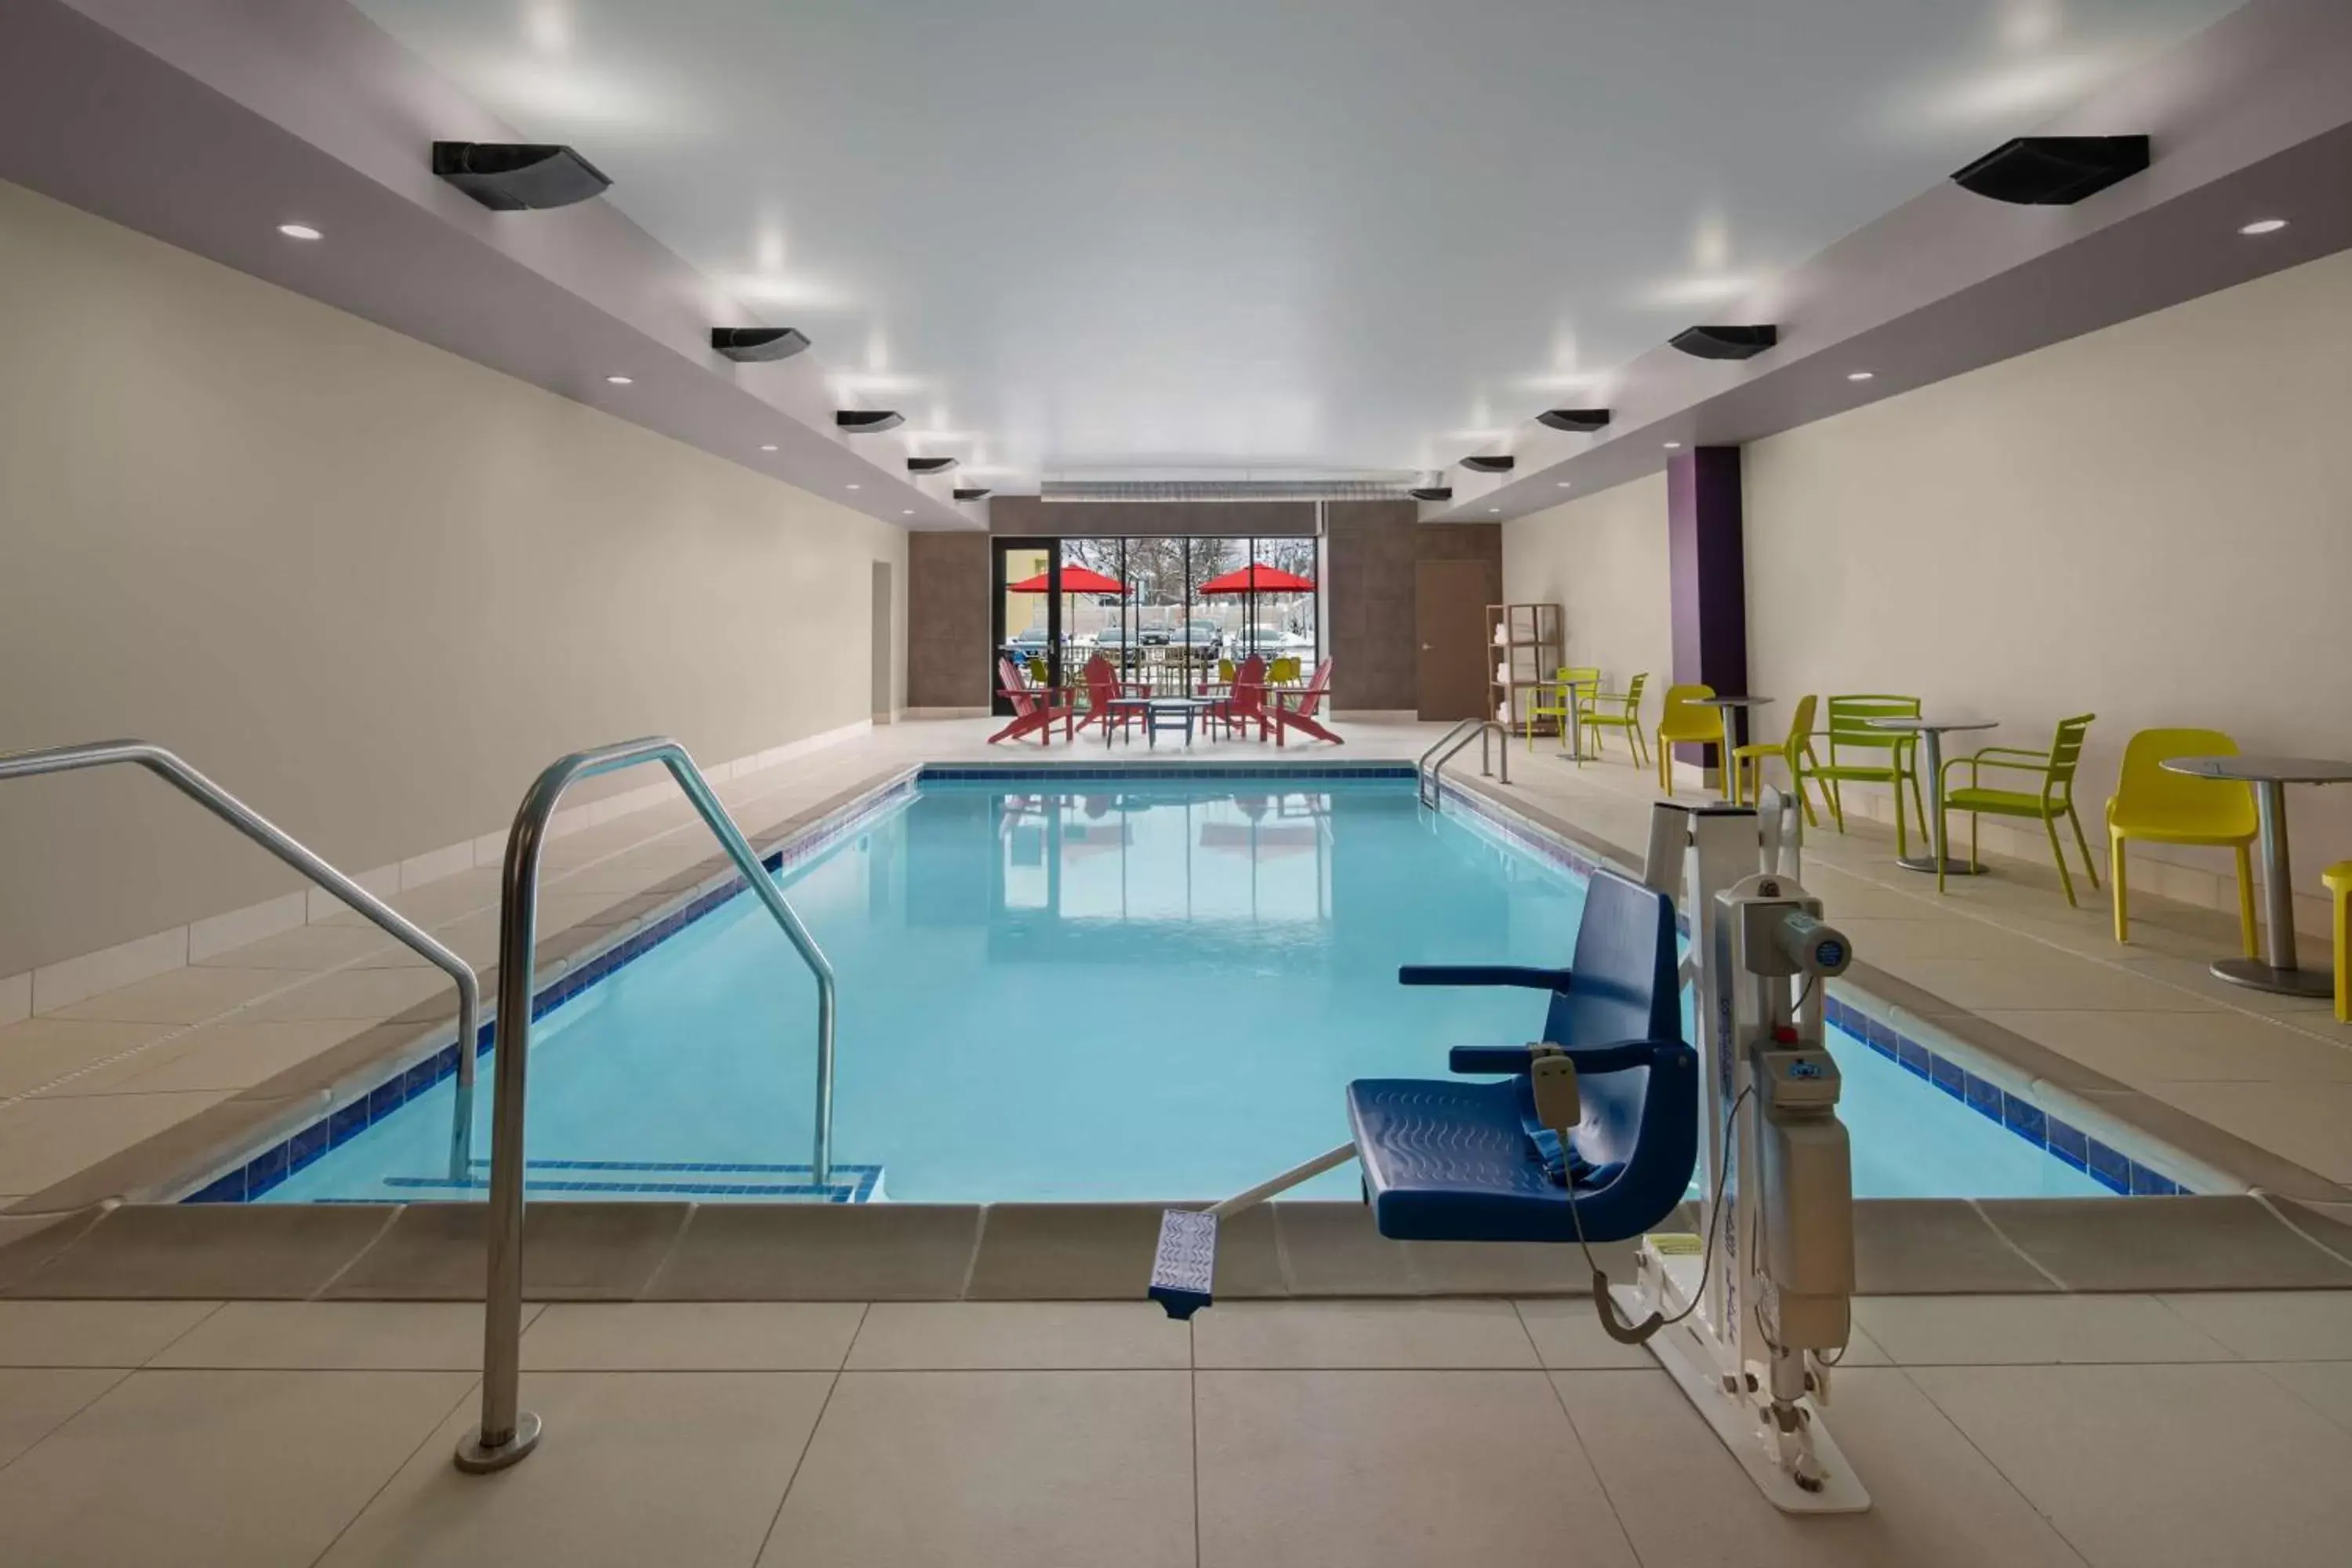 Swimming Pool in Home2 Suites by Hilton Des Moines at Drake University